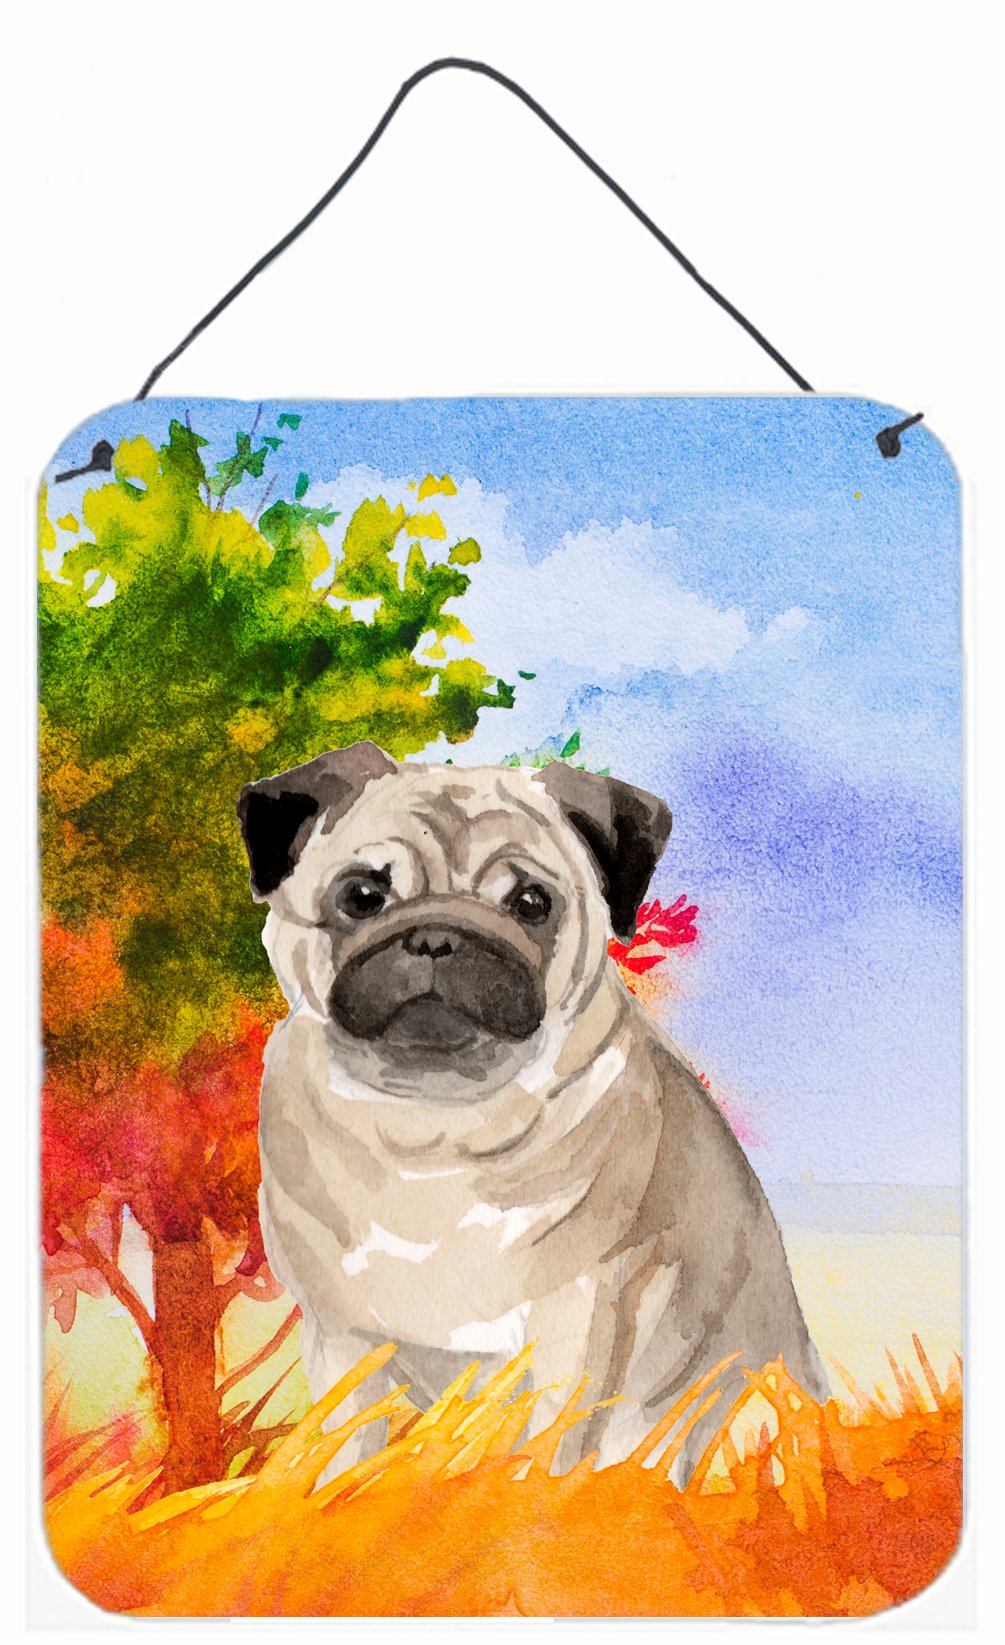 Fall Fawn Pug Wall or Door Hanging Prints CK1934DS1216 by Caroline's Treasures